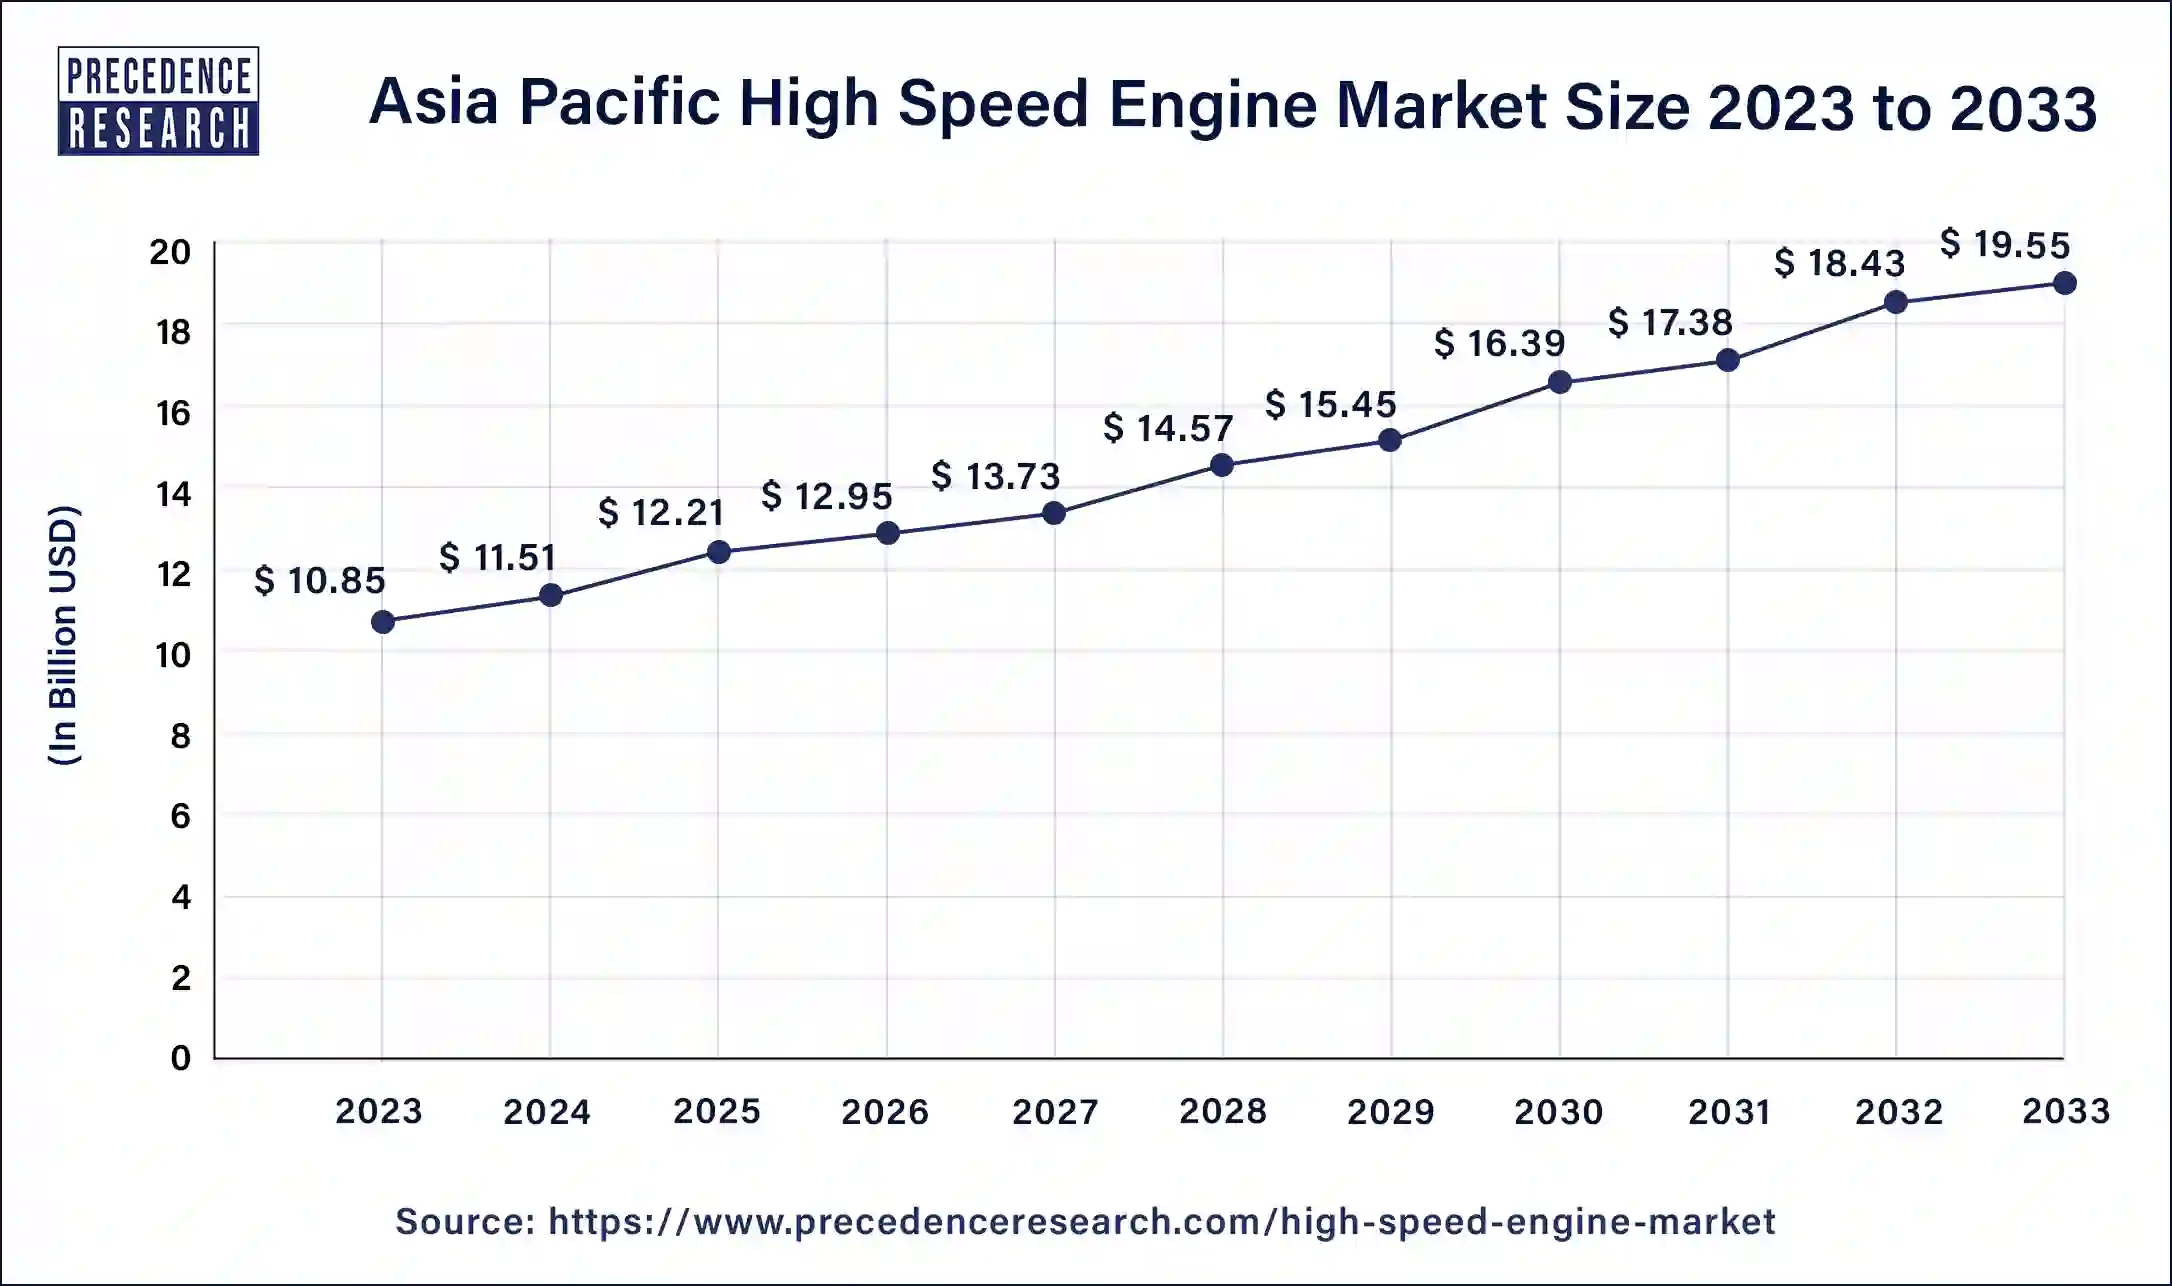 Asia Pacific High Speed Engine Market Size 2024 to 2033